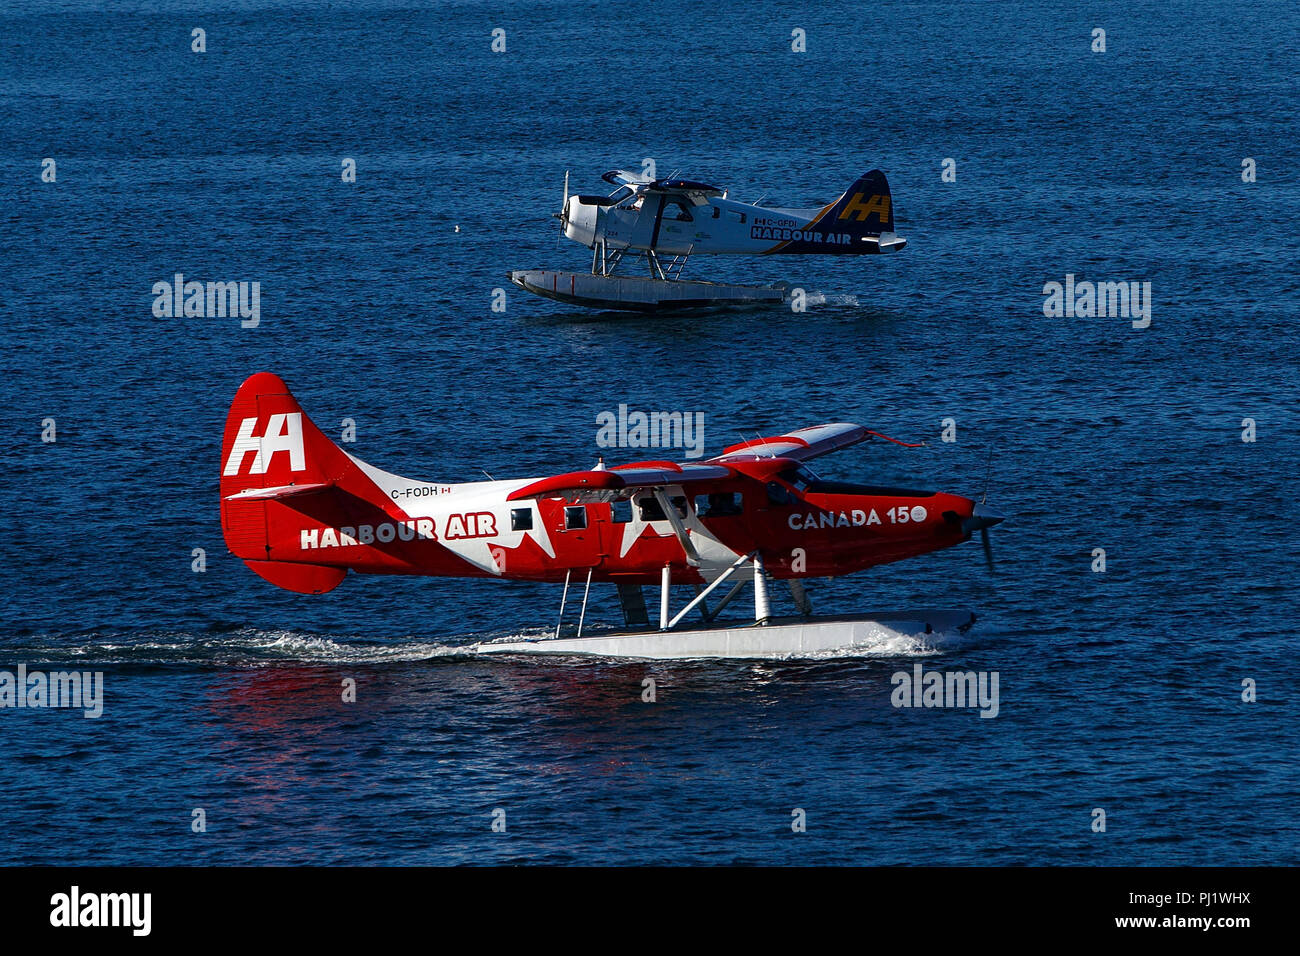 De Havilland Canada DHC-3T Vazar Turbine Otter (C-FODH) operated by Harbour Air with the Canada 150 Livery taxies past De Havilland Canada DHC-2 Mk.1 Beaver (C-GFDI) operated by West Coast Air, Vancouver Harbor, Vancouver, British Columbia, Canada Stock Photo